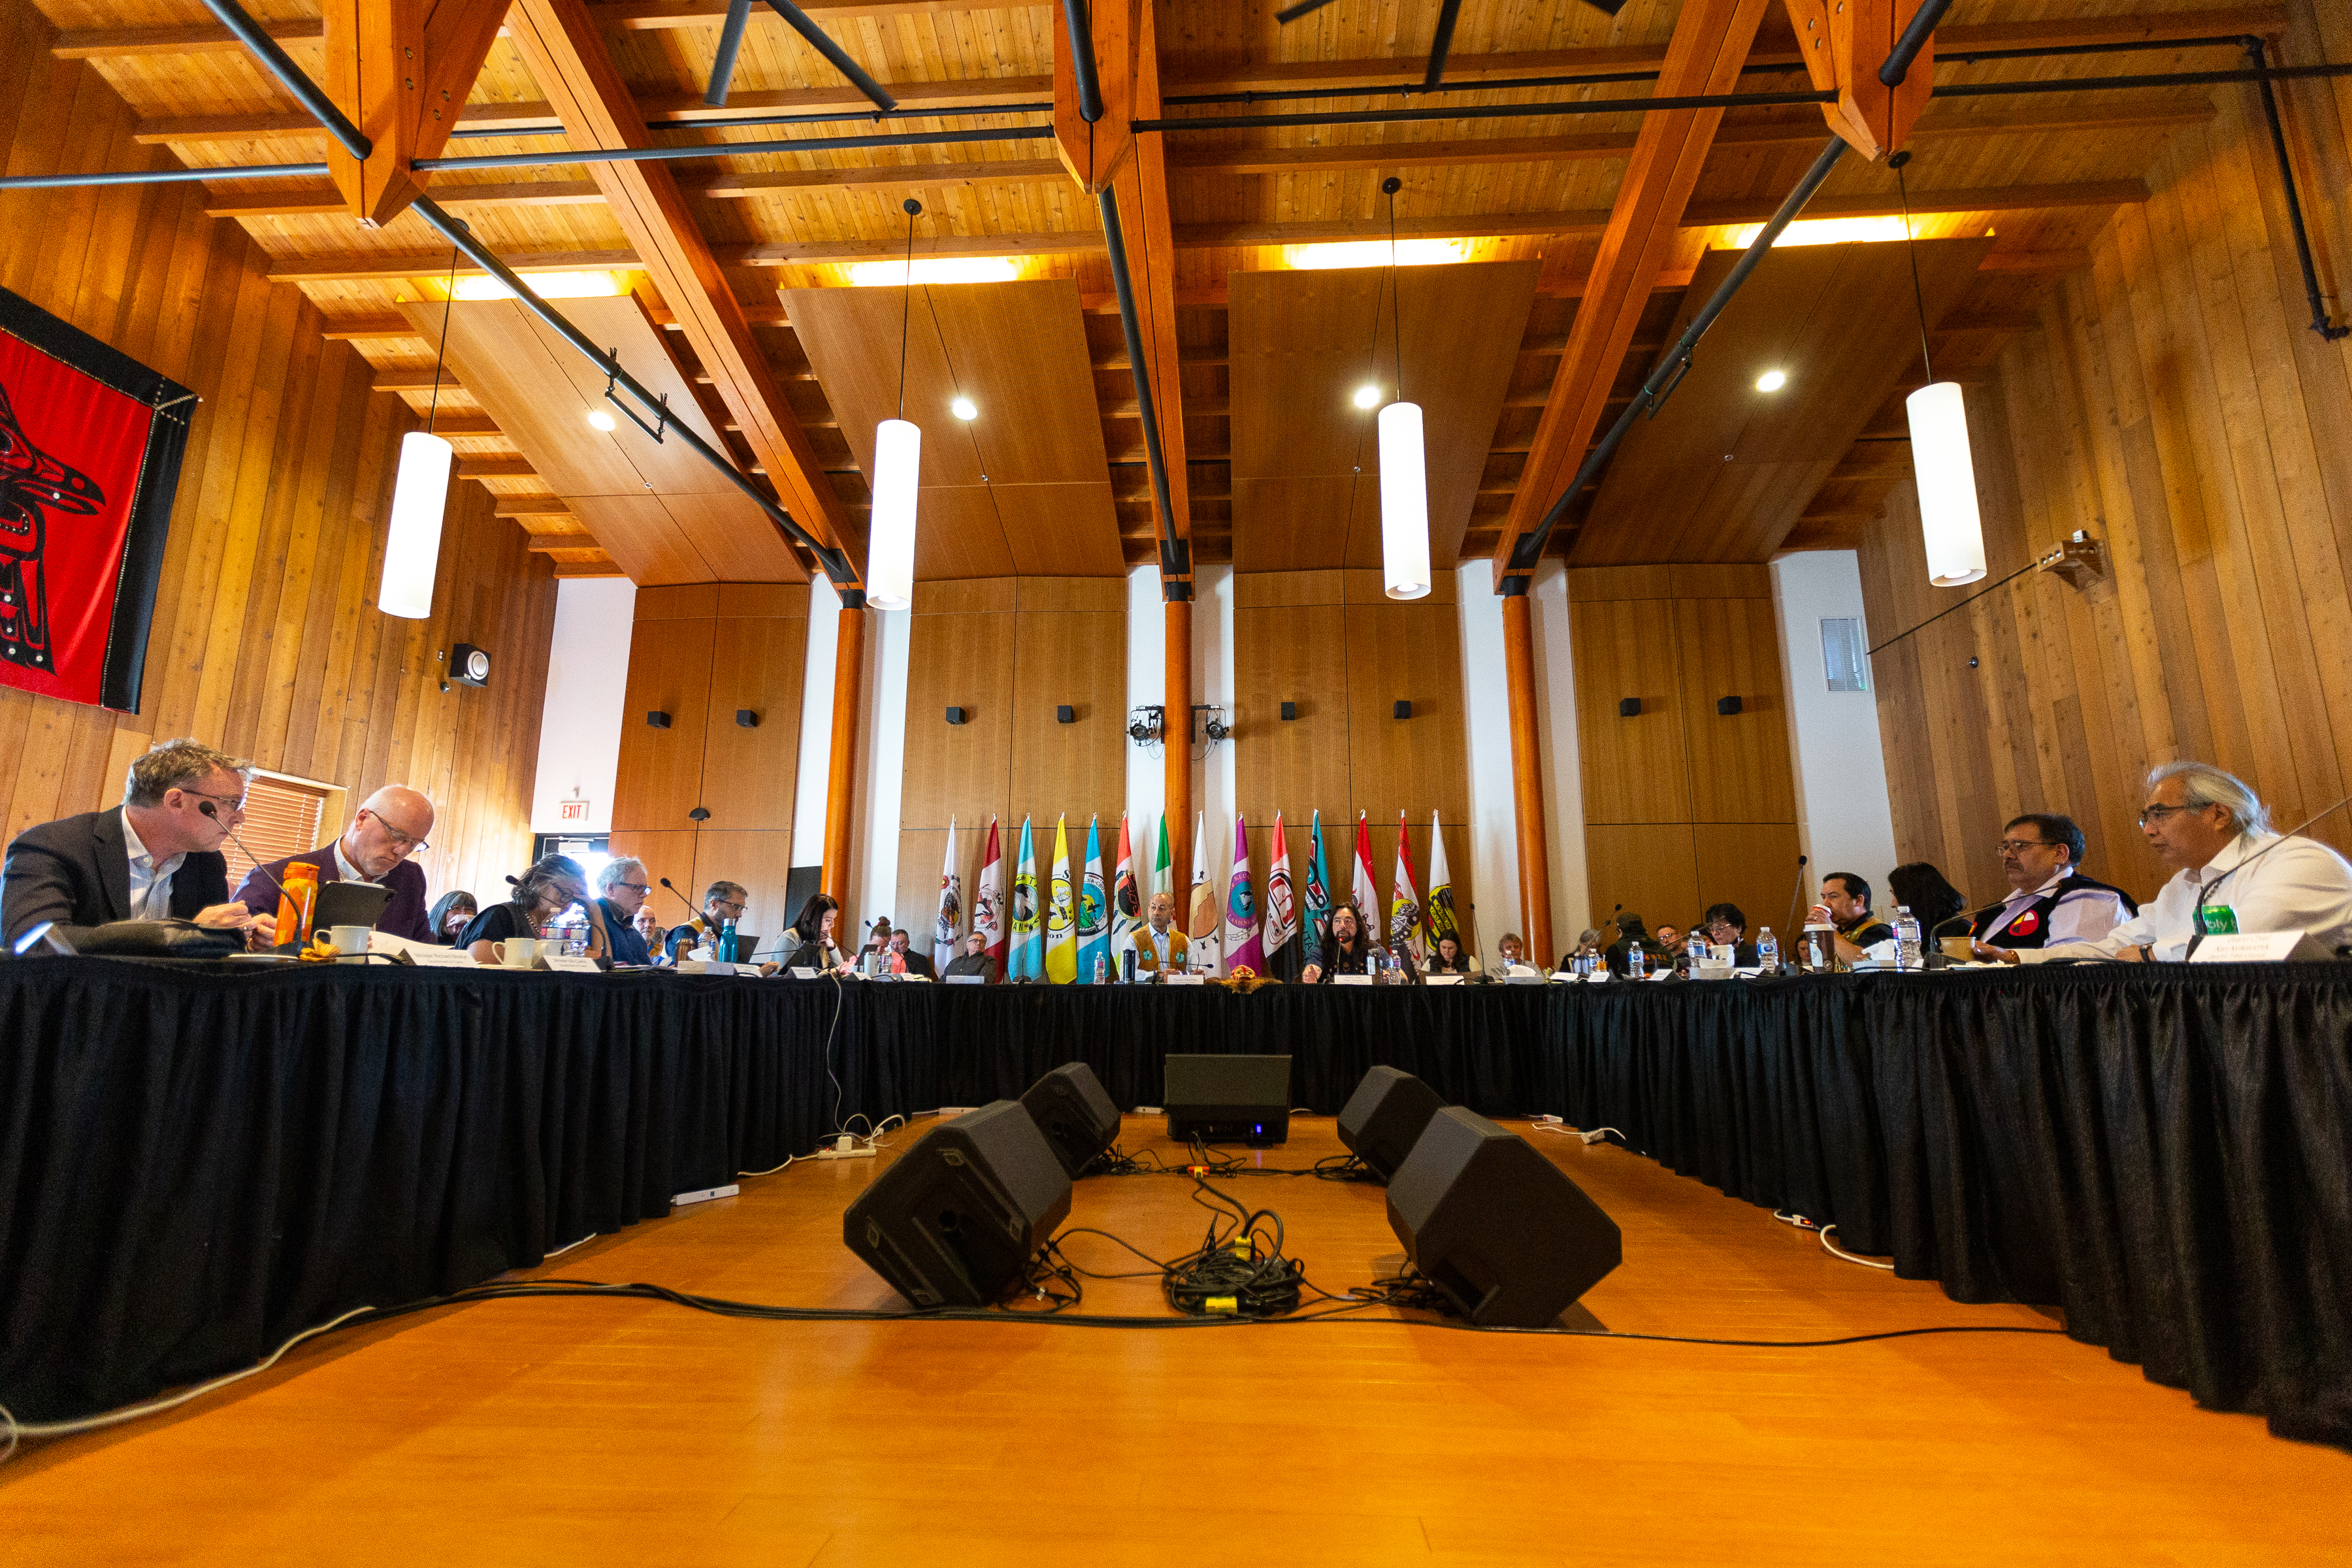 Grand Chief of the Council of Yukon First Nations, Peter Johnston addresses the room during the first Yukon Forum of 2024 which was held at the Kwanlin Dün Cultural Centre on February 16, 2024